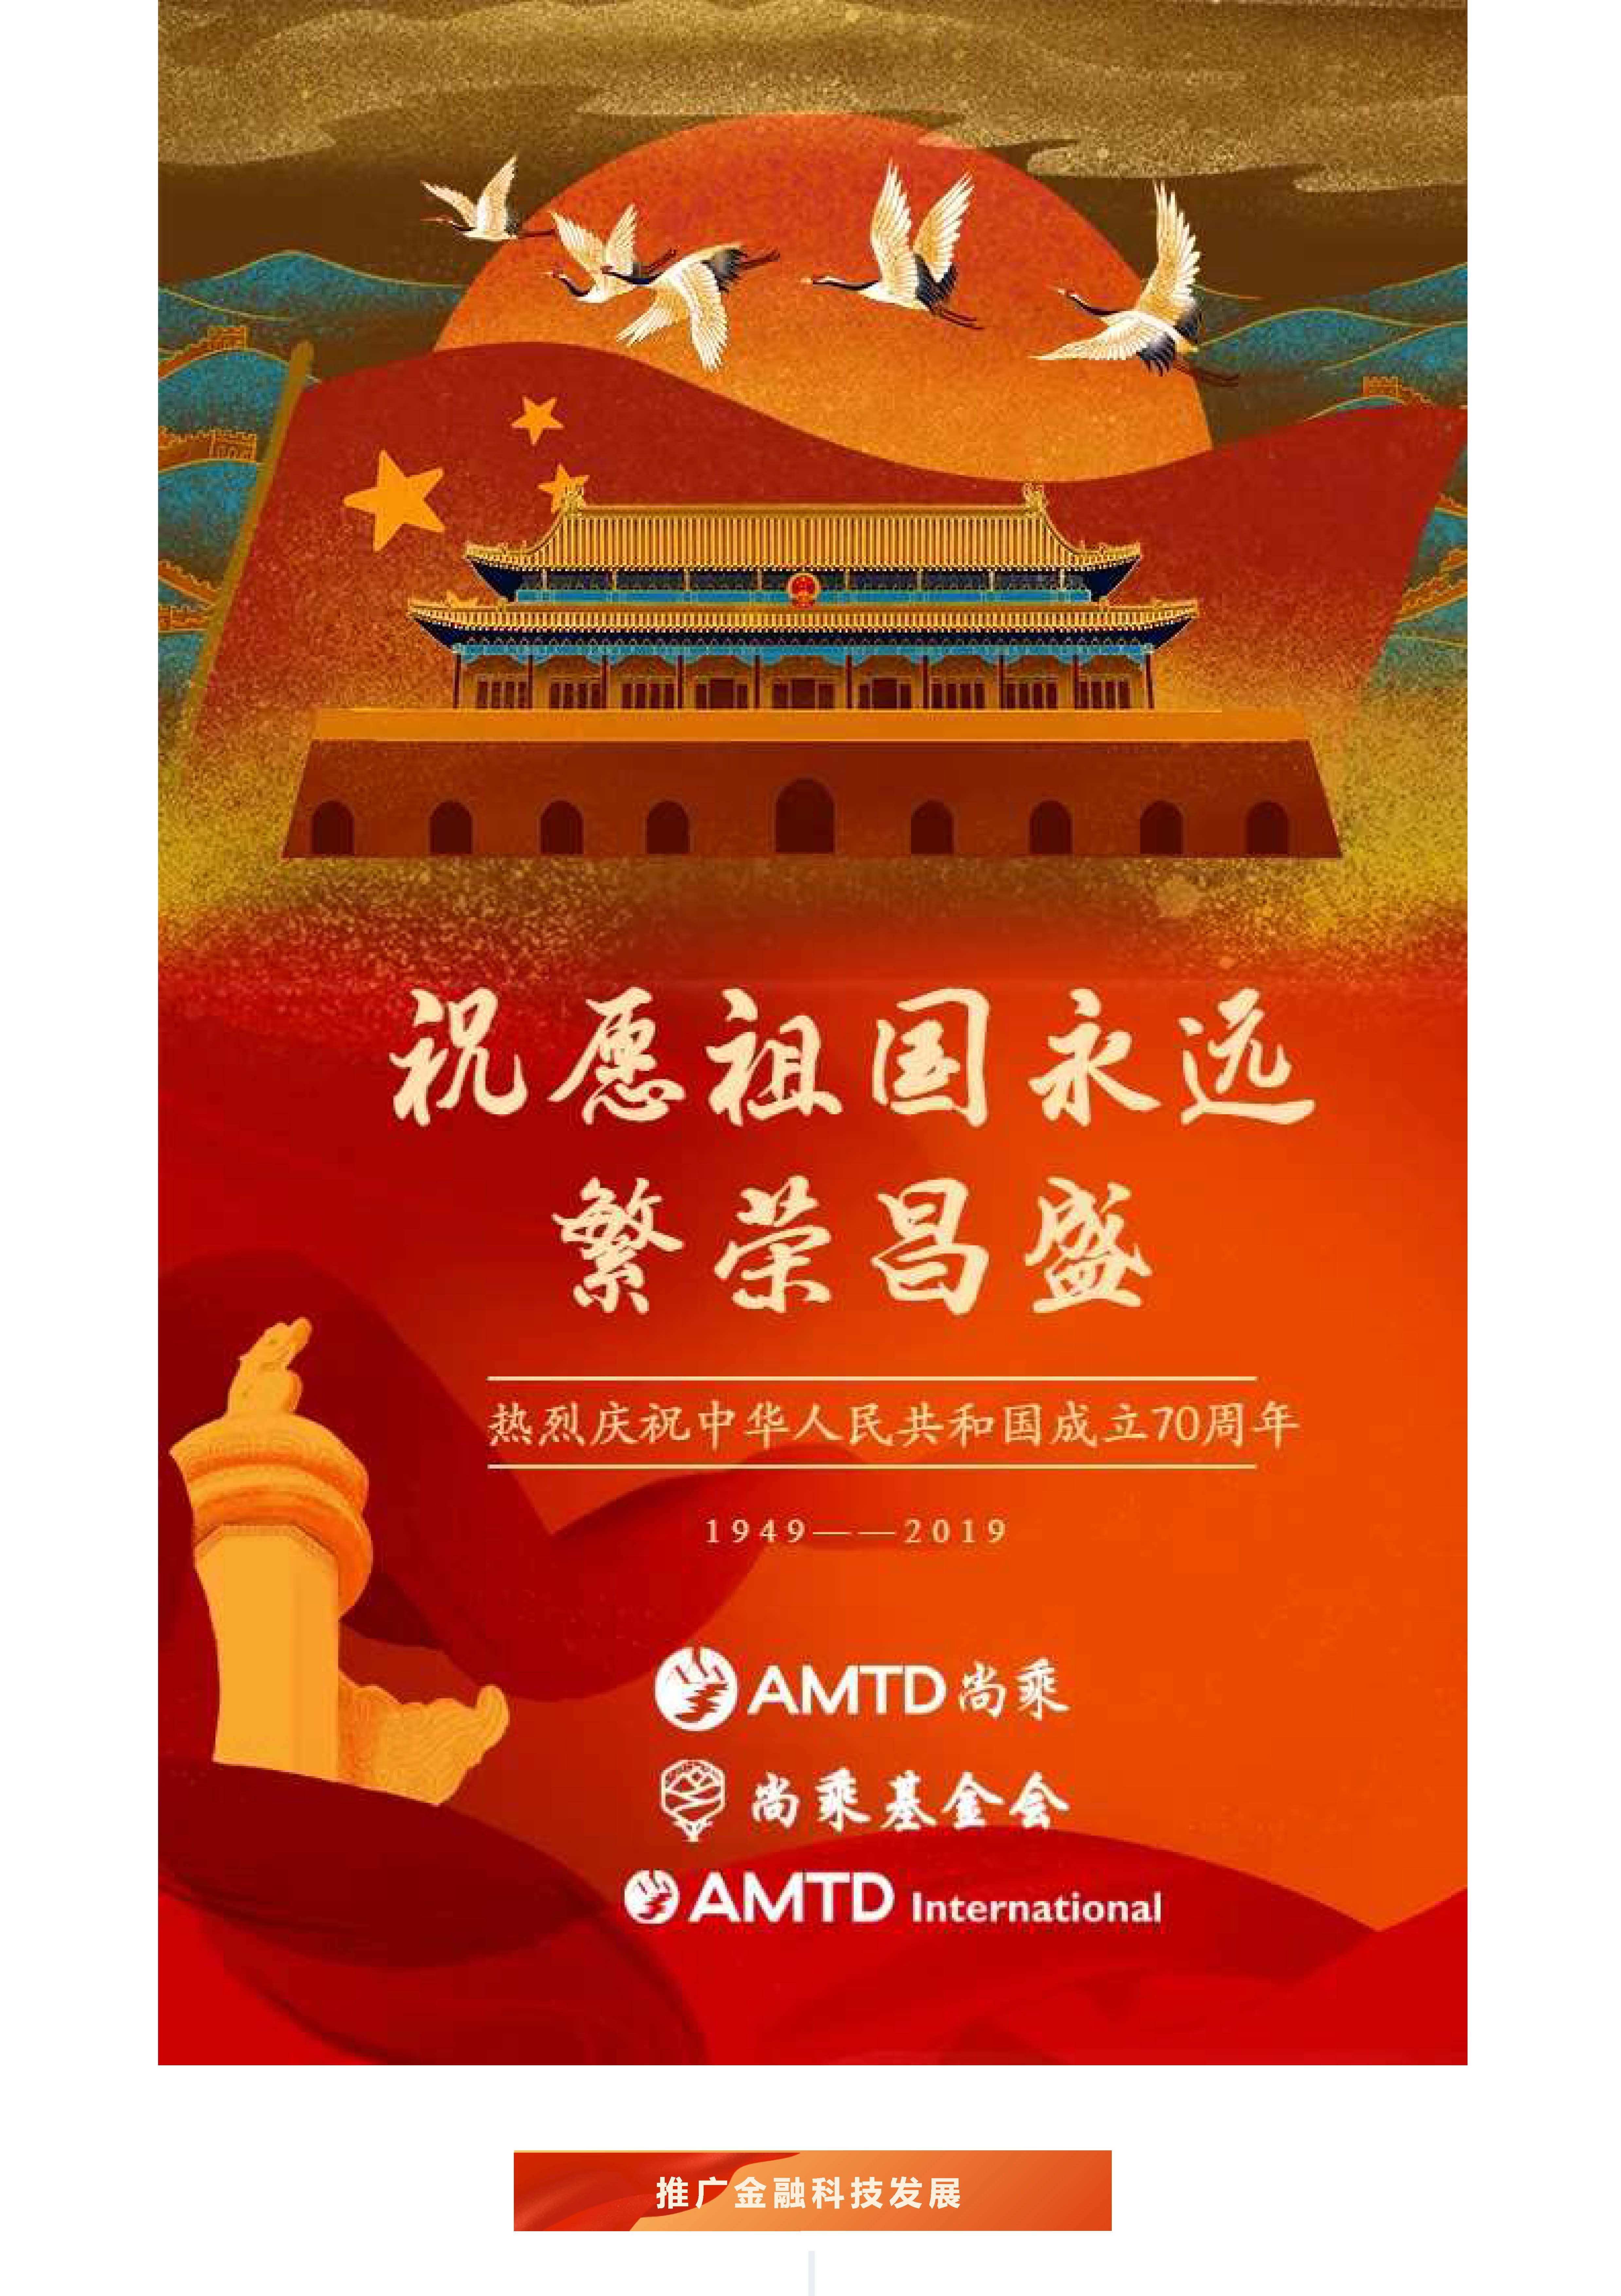 「AMTD · My Country and I」Vol.1 | Faithfully support the policies of “one country, two systems” and make contributions to the prosperity of the motherland and national rejuvenation